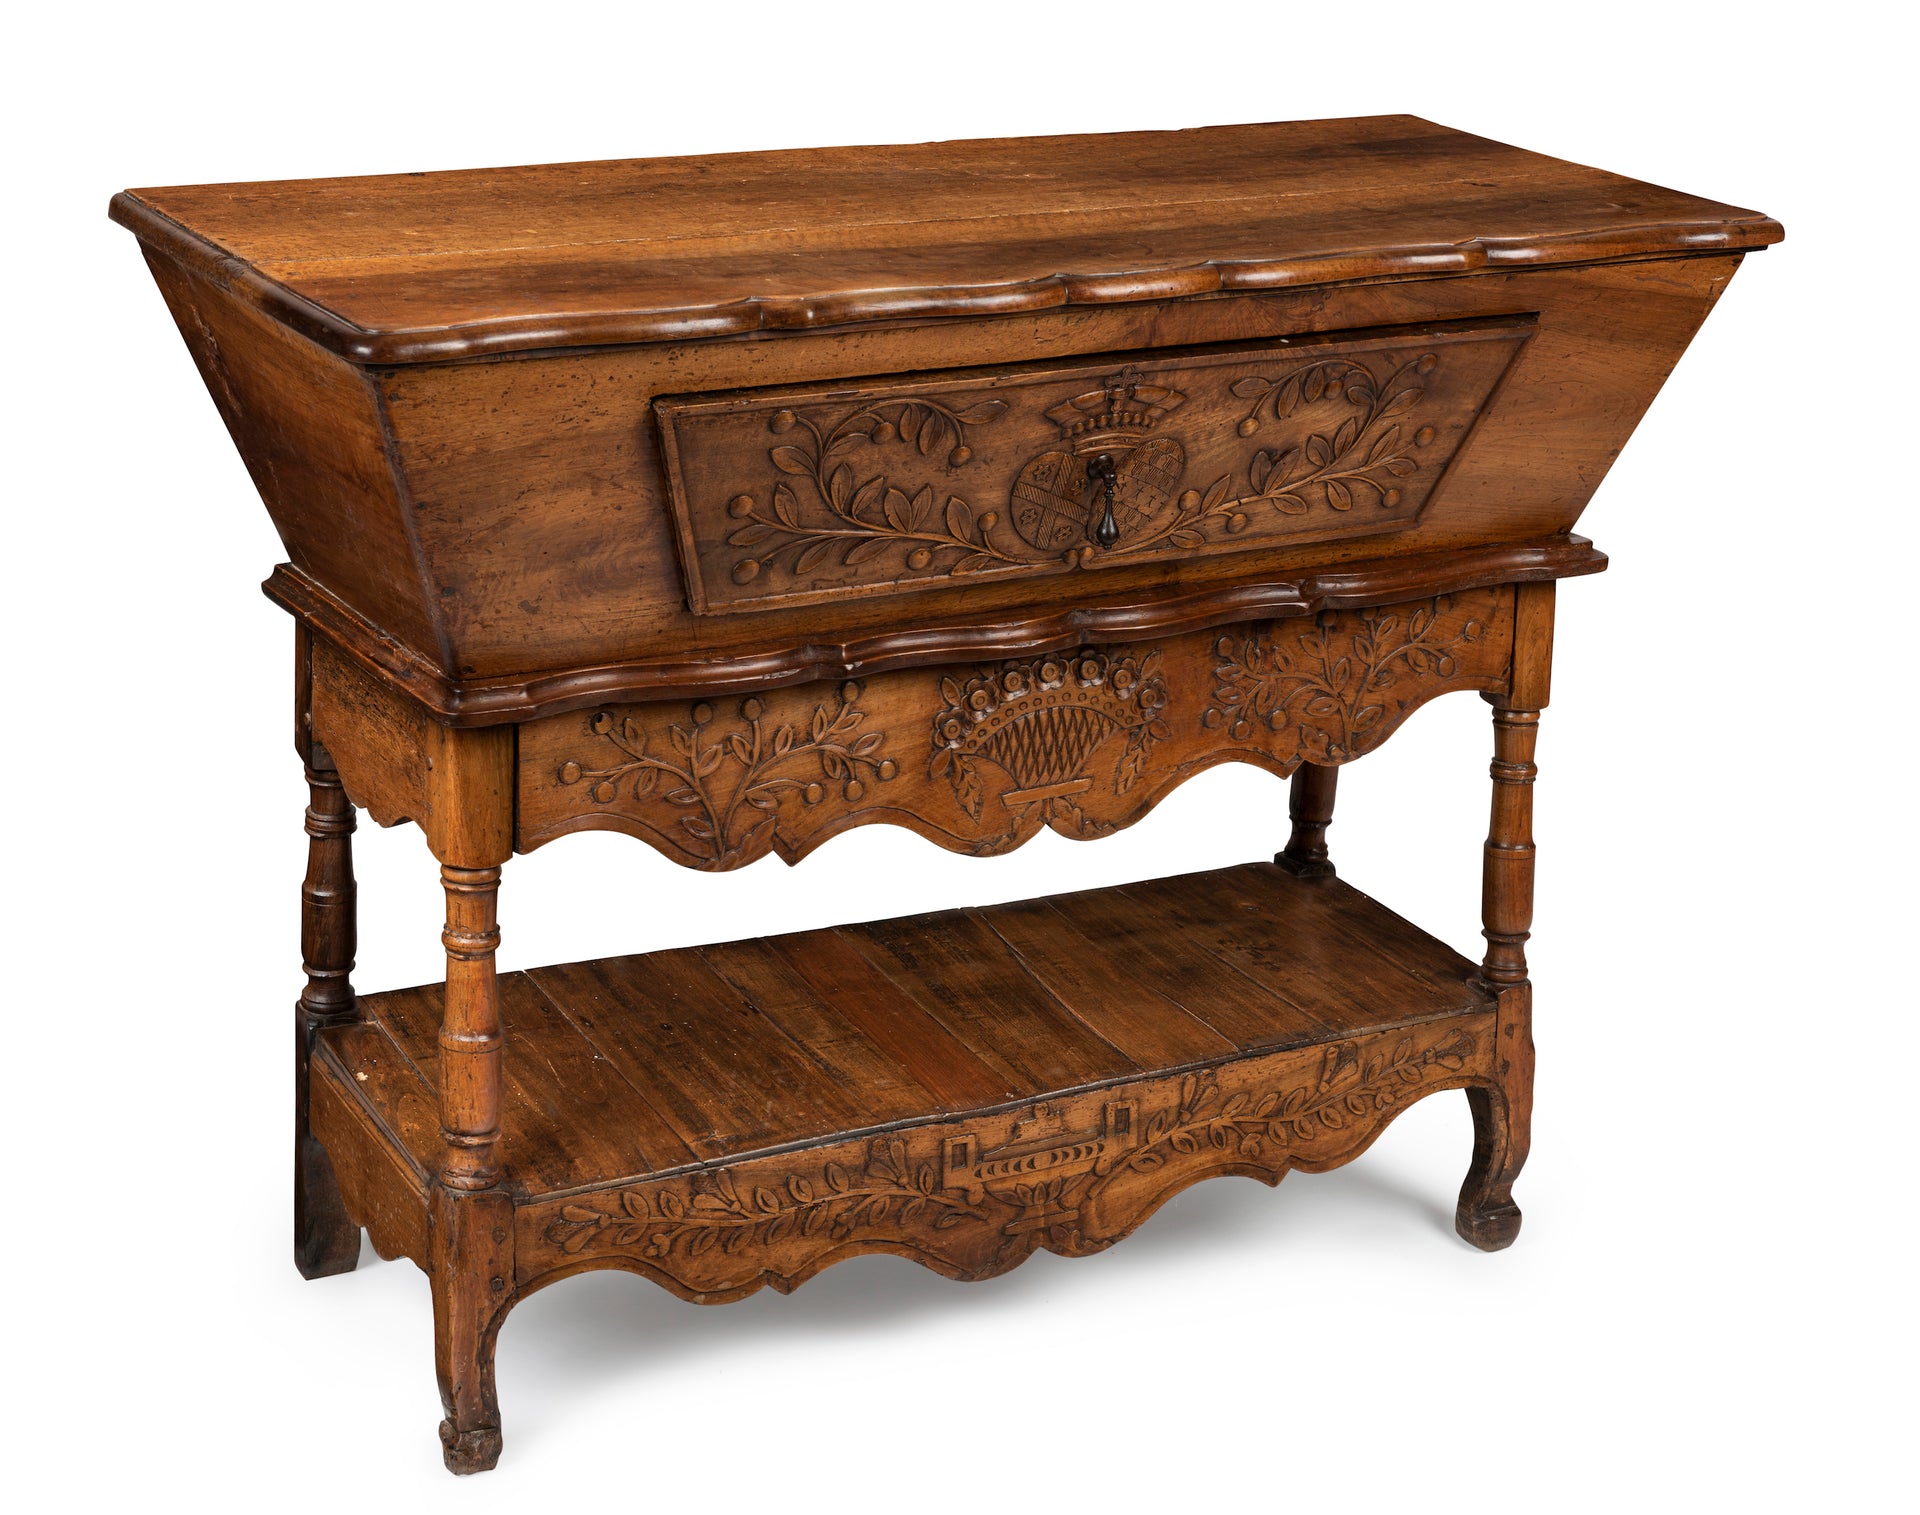 SOLD A beautifully carved walnut and fruitwood dough bin, French 18th Century